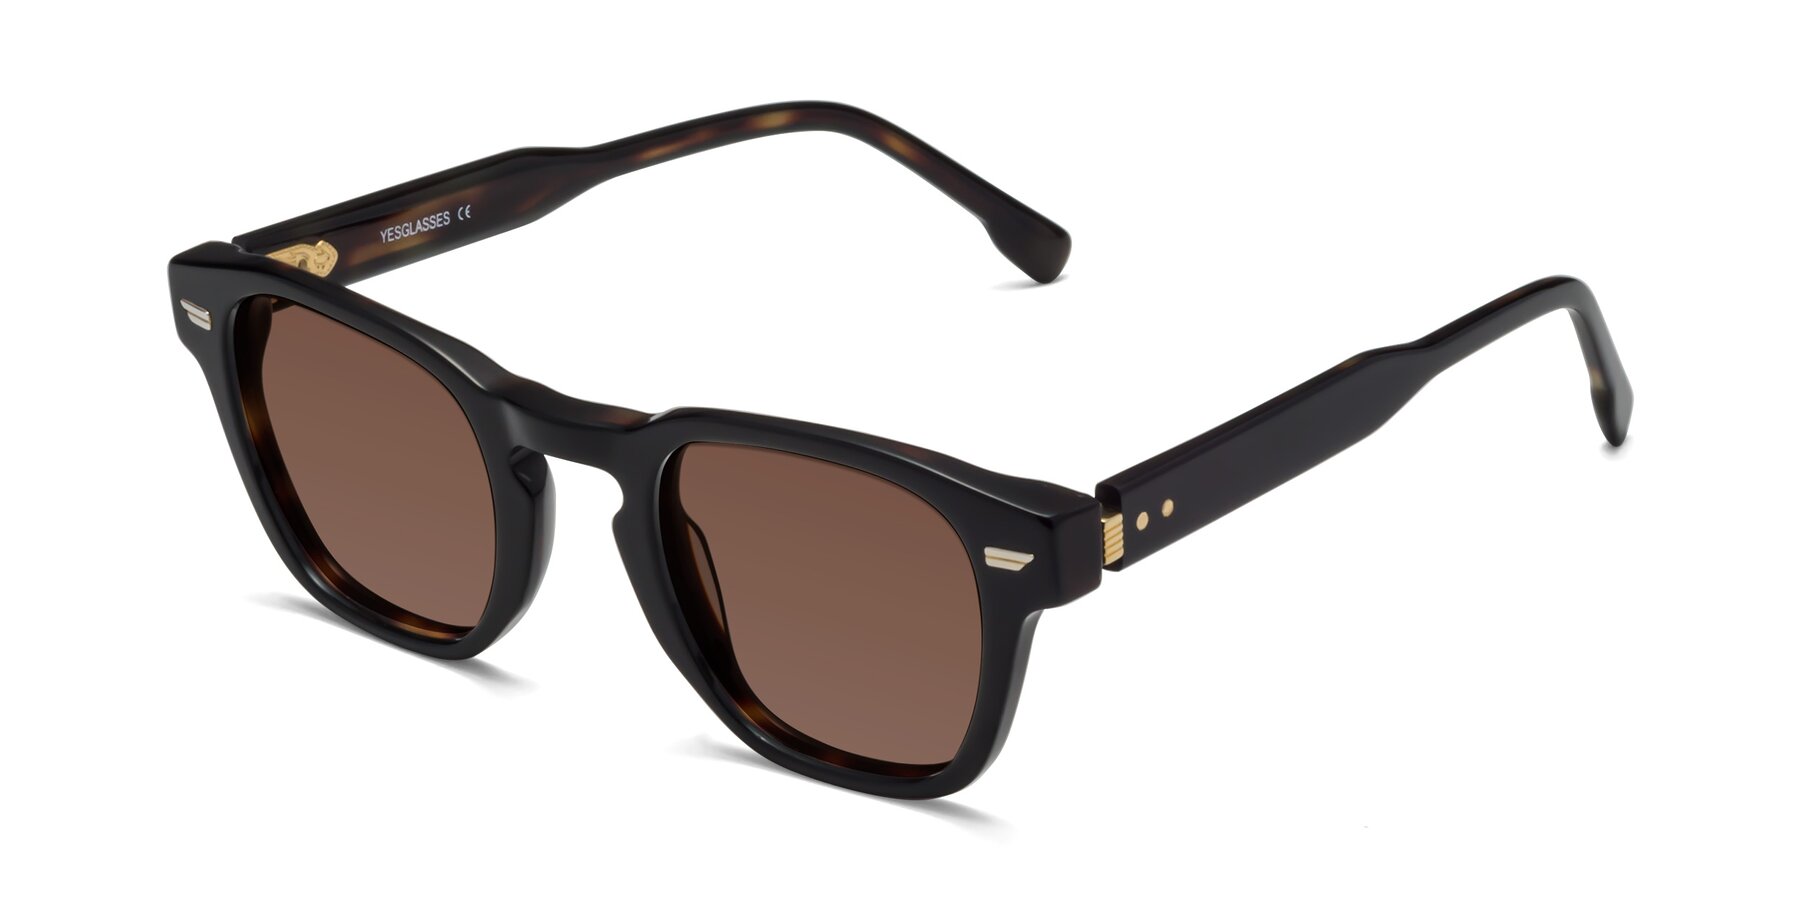 Angle of Costa in Black-Tortoise with Brown Tinted Lenses